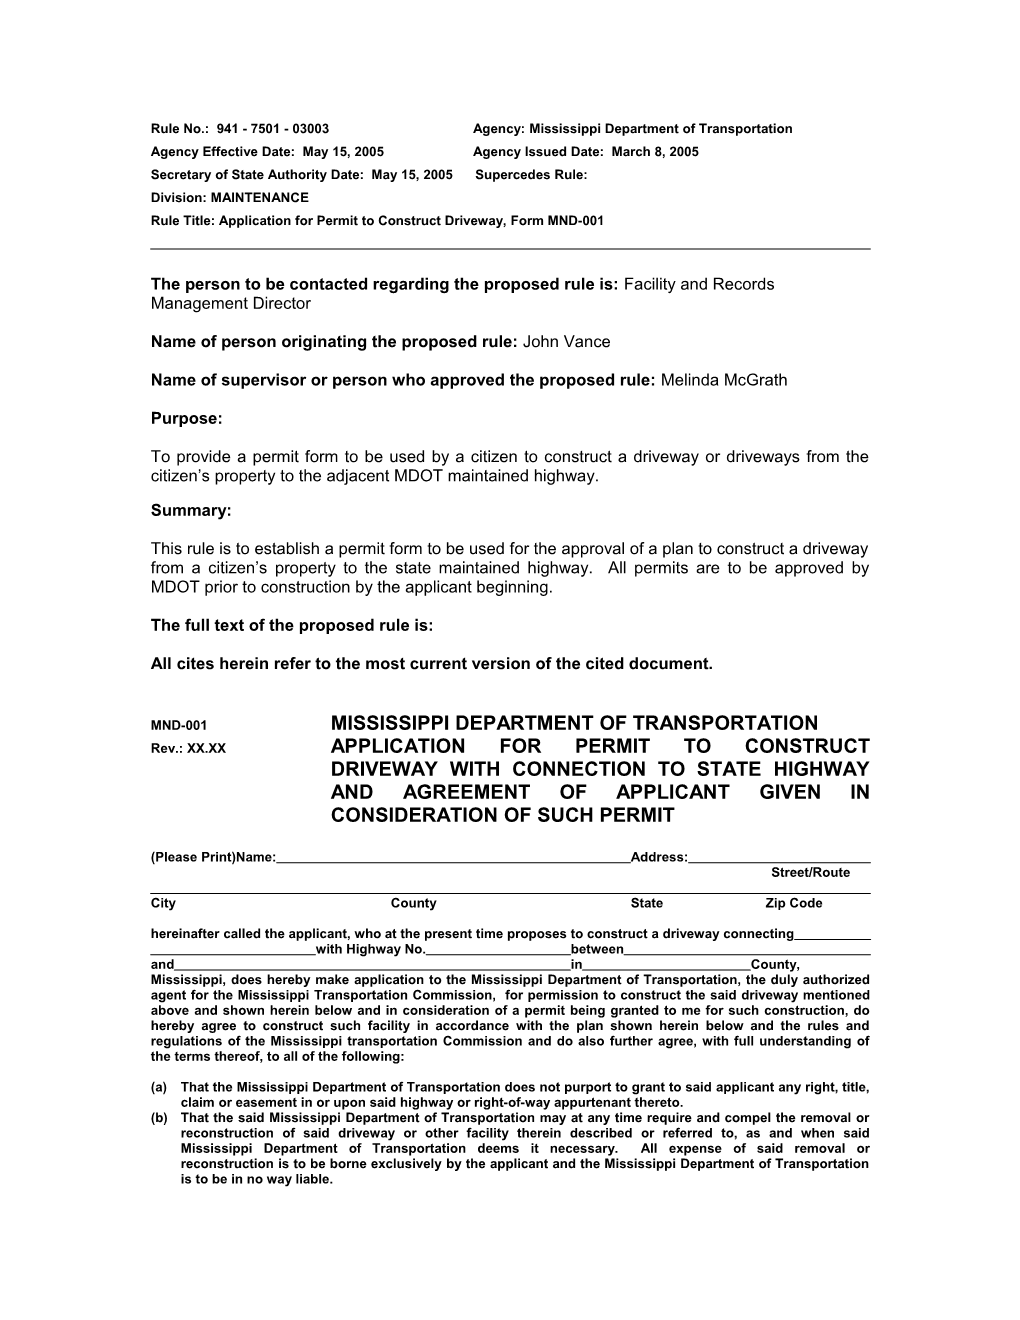 Application for Permit to Construct Driveway, Form MND-001